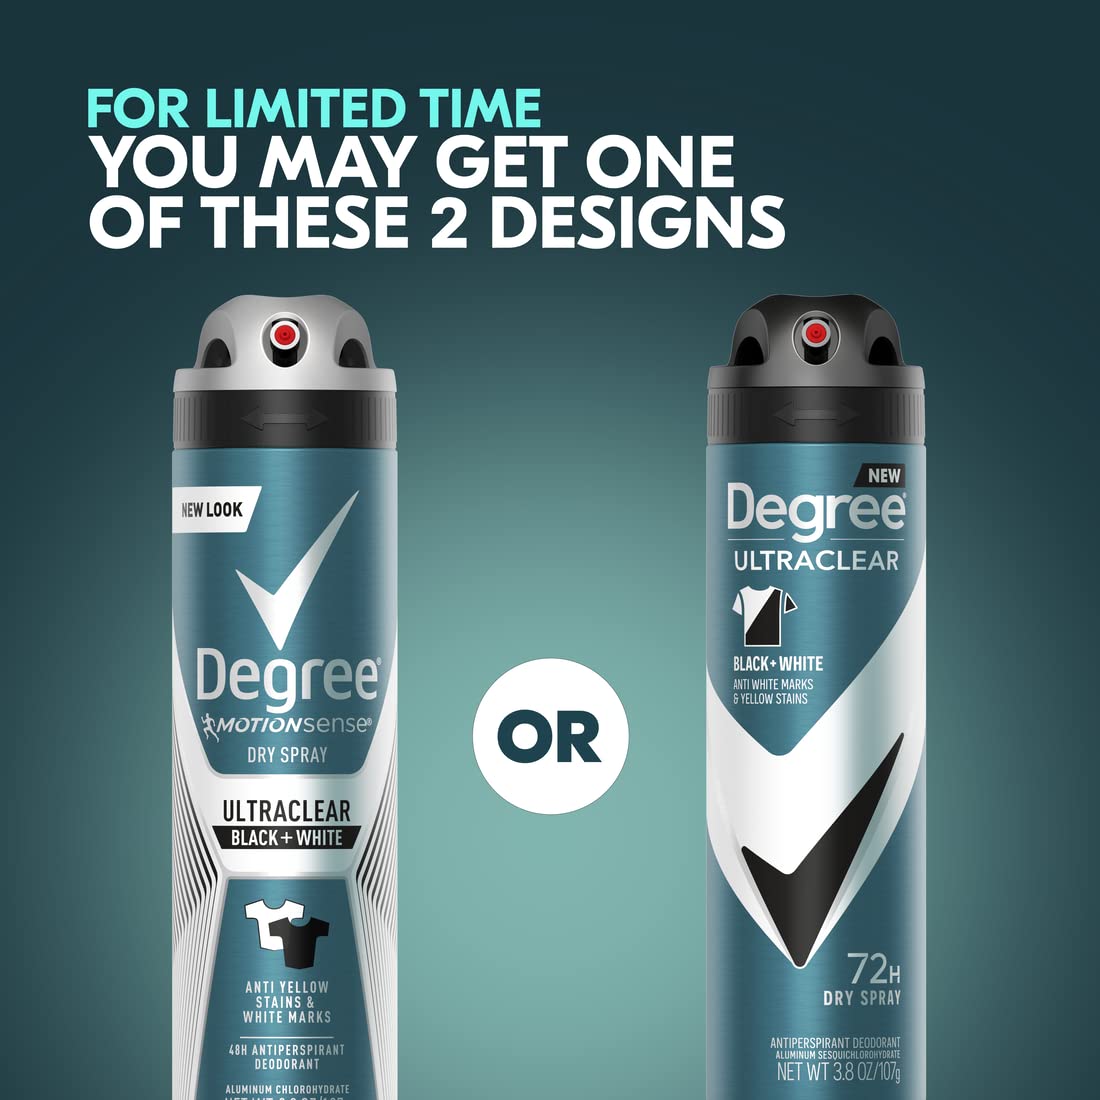 Degree Men Antiperspirant Deodorant Dry Spray Black + White 3 Count Protects from Deodorant Stains Antiperspirant for Men with MotionSense Technology 3.8 OZ